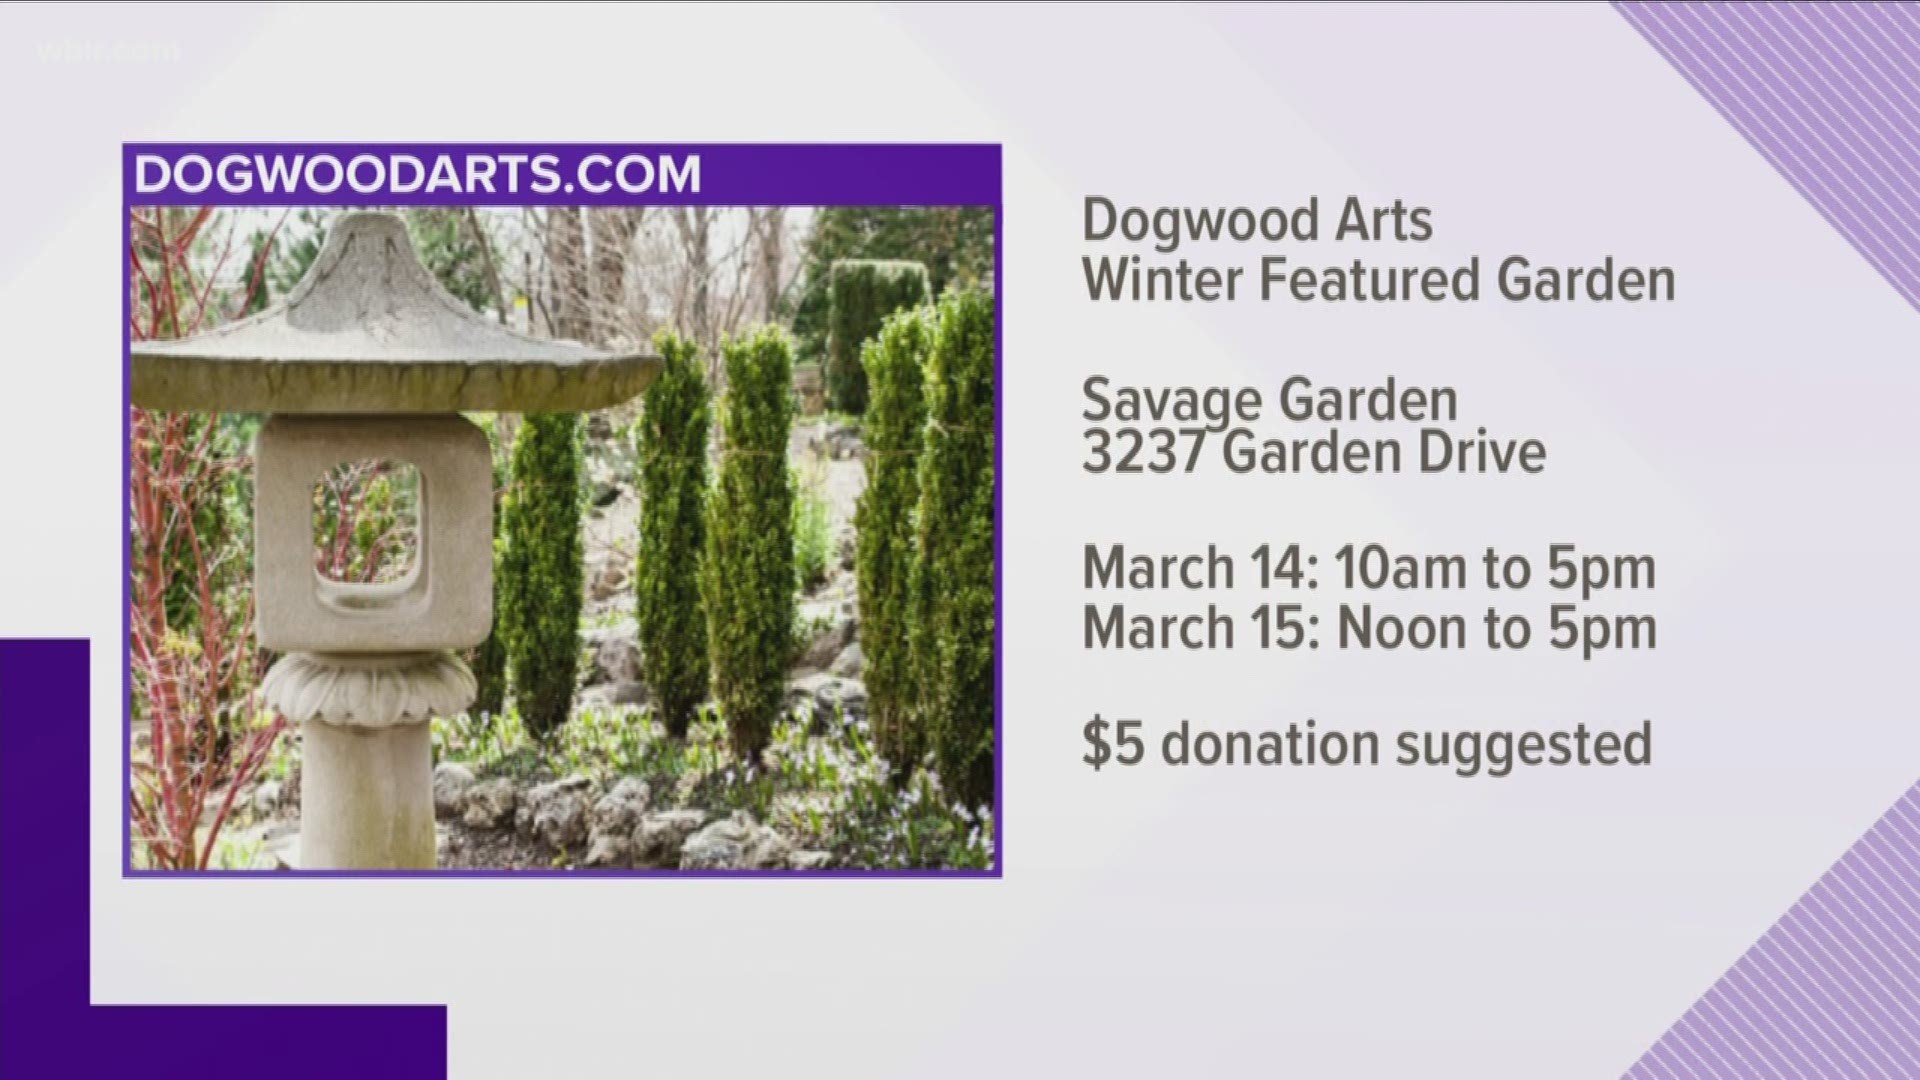 Savage Garden in Fountain City will be open for self-guided tours on Saturday and Sunday. A $5 donation is encouraged.